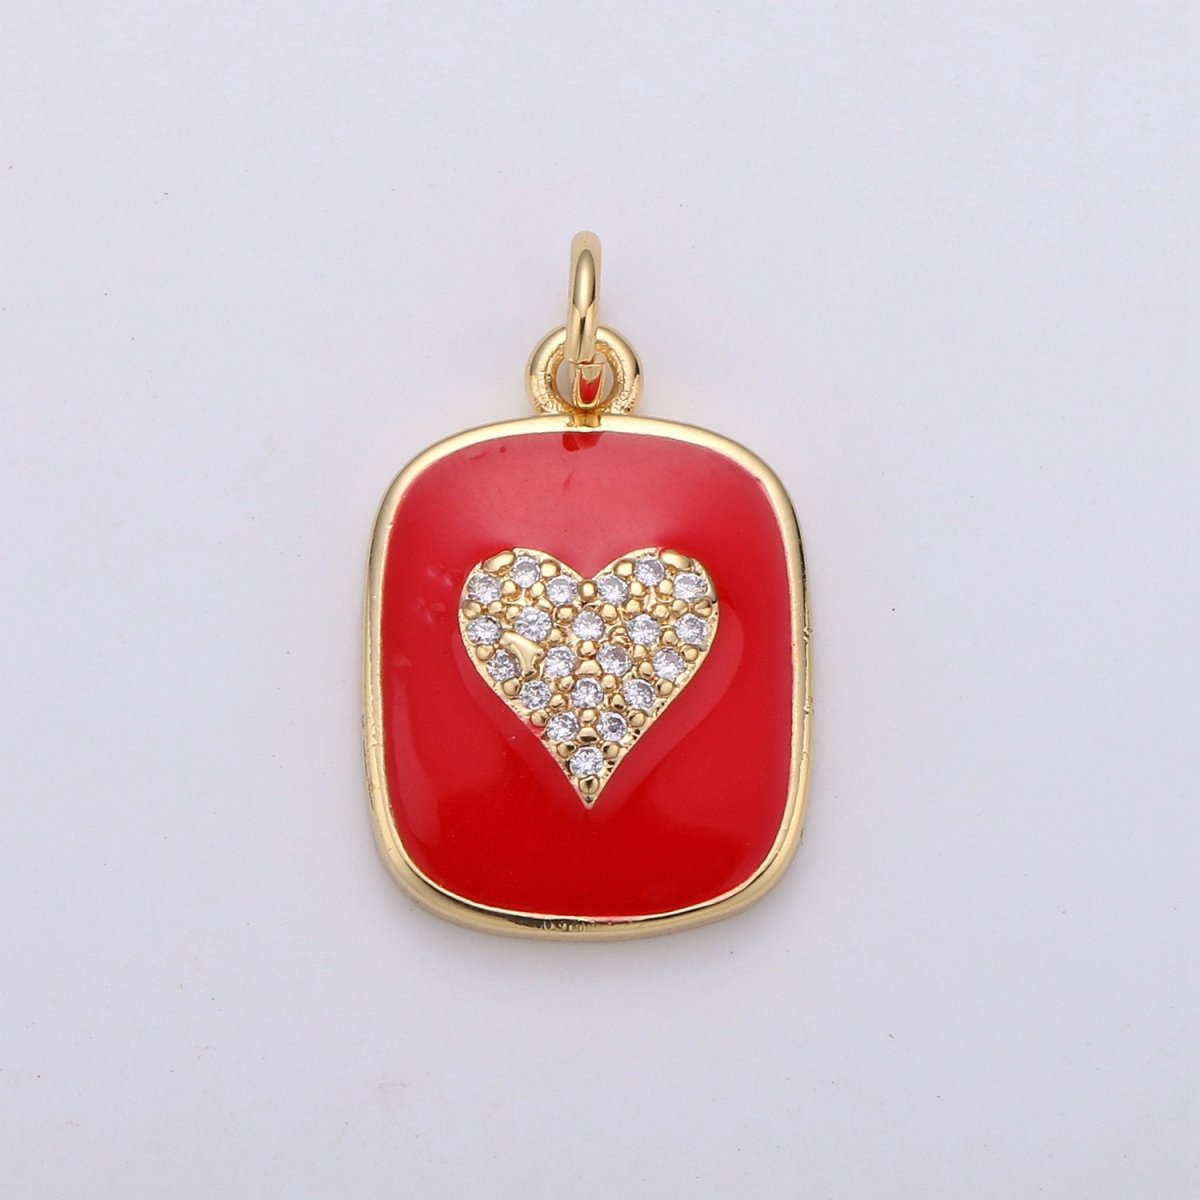 24K Gold Filled Dainty Heart Enamel Charm in Black, White, Red or Pink with Micro Pave Cubic Zirconia CZ Stone for Necklace or Bracelet |OLD- C-866, C-867 - DLUXCA